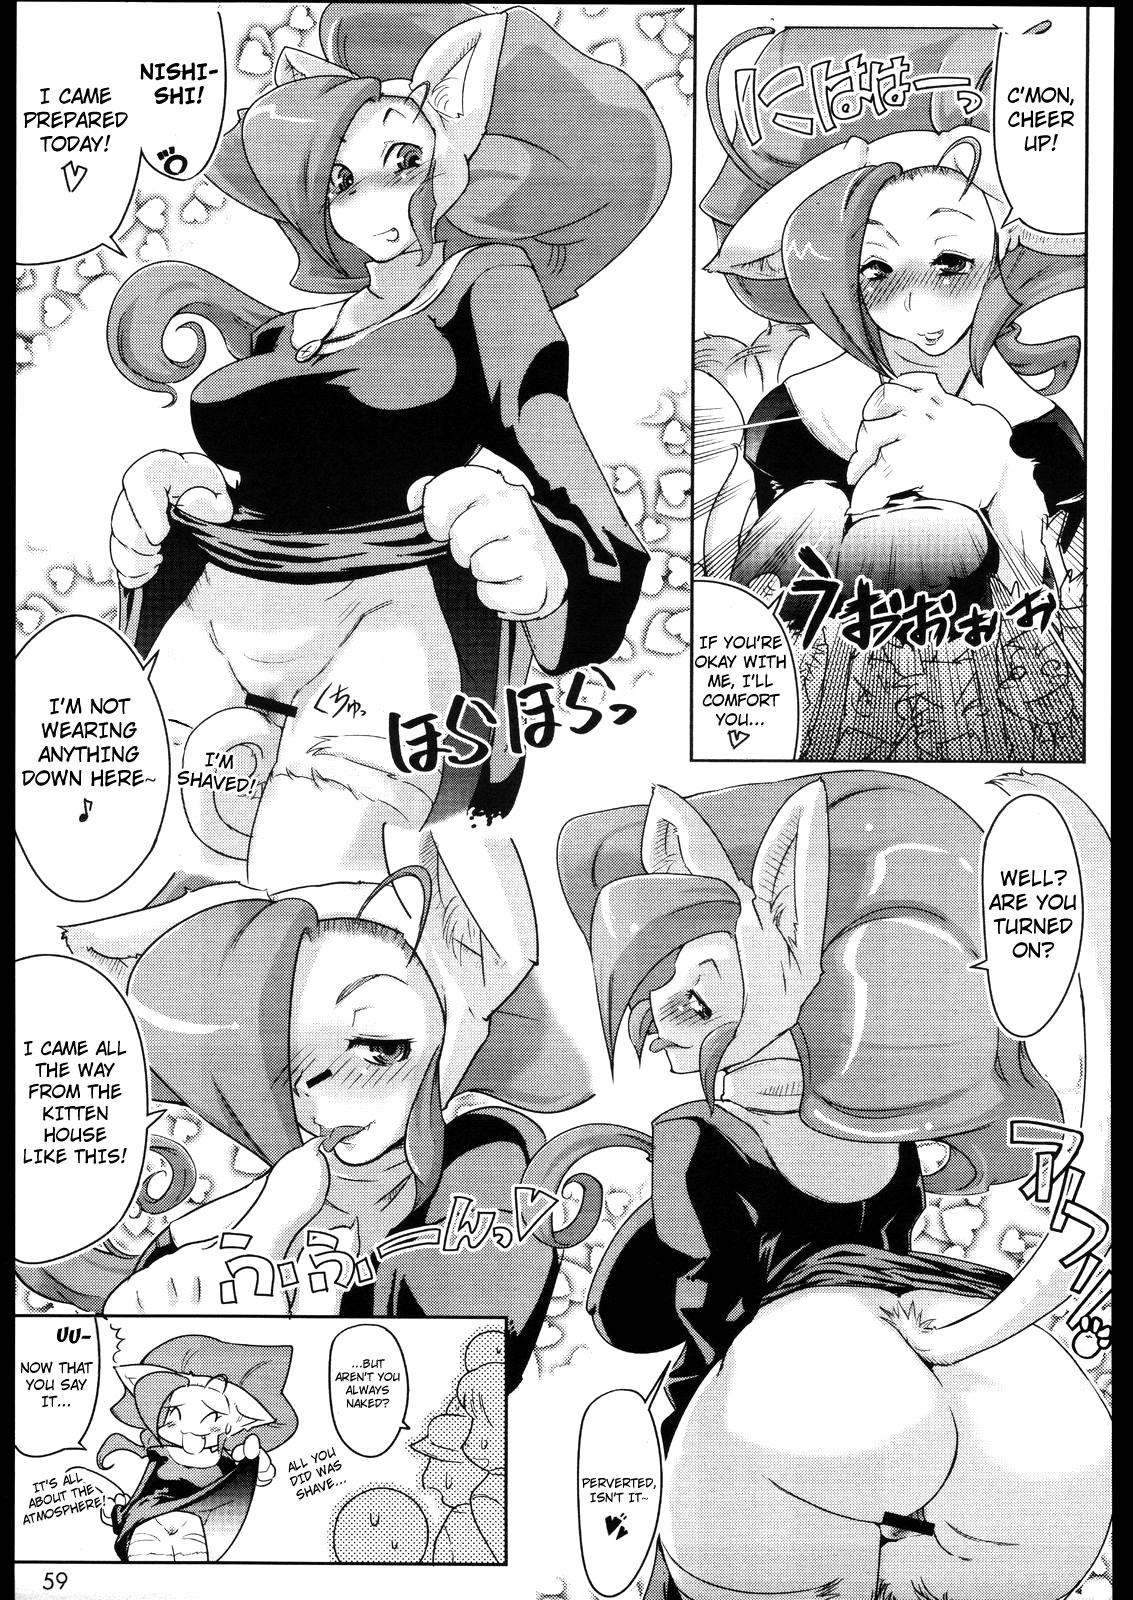 Asia Always Cheerful! - Darkstalkers Pay - Page 5